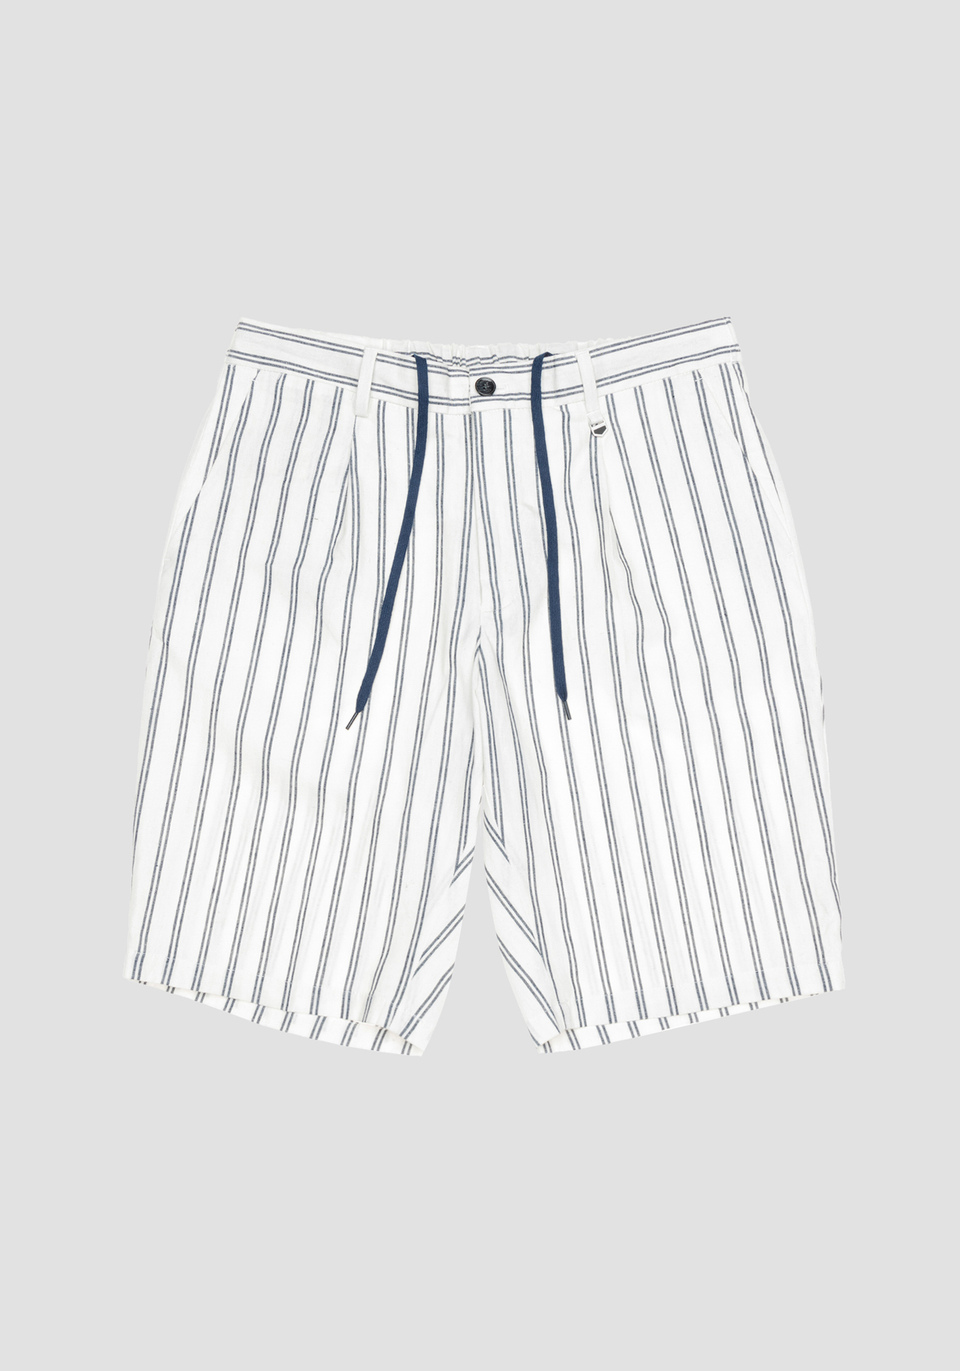 “GUSTAF” CARROT-FIT SHORTS IN LINEN BLEND WITH STRIPED PATTERN - Antony Morato Online Shop